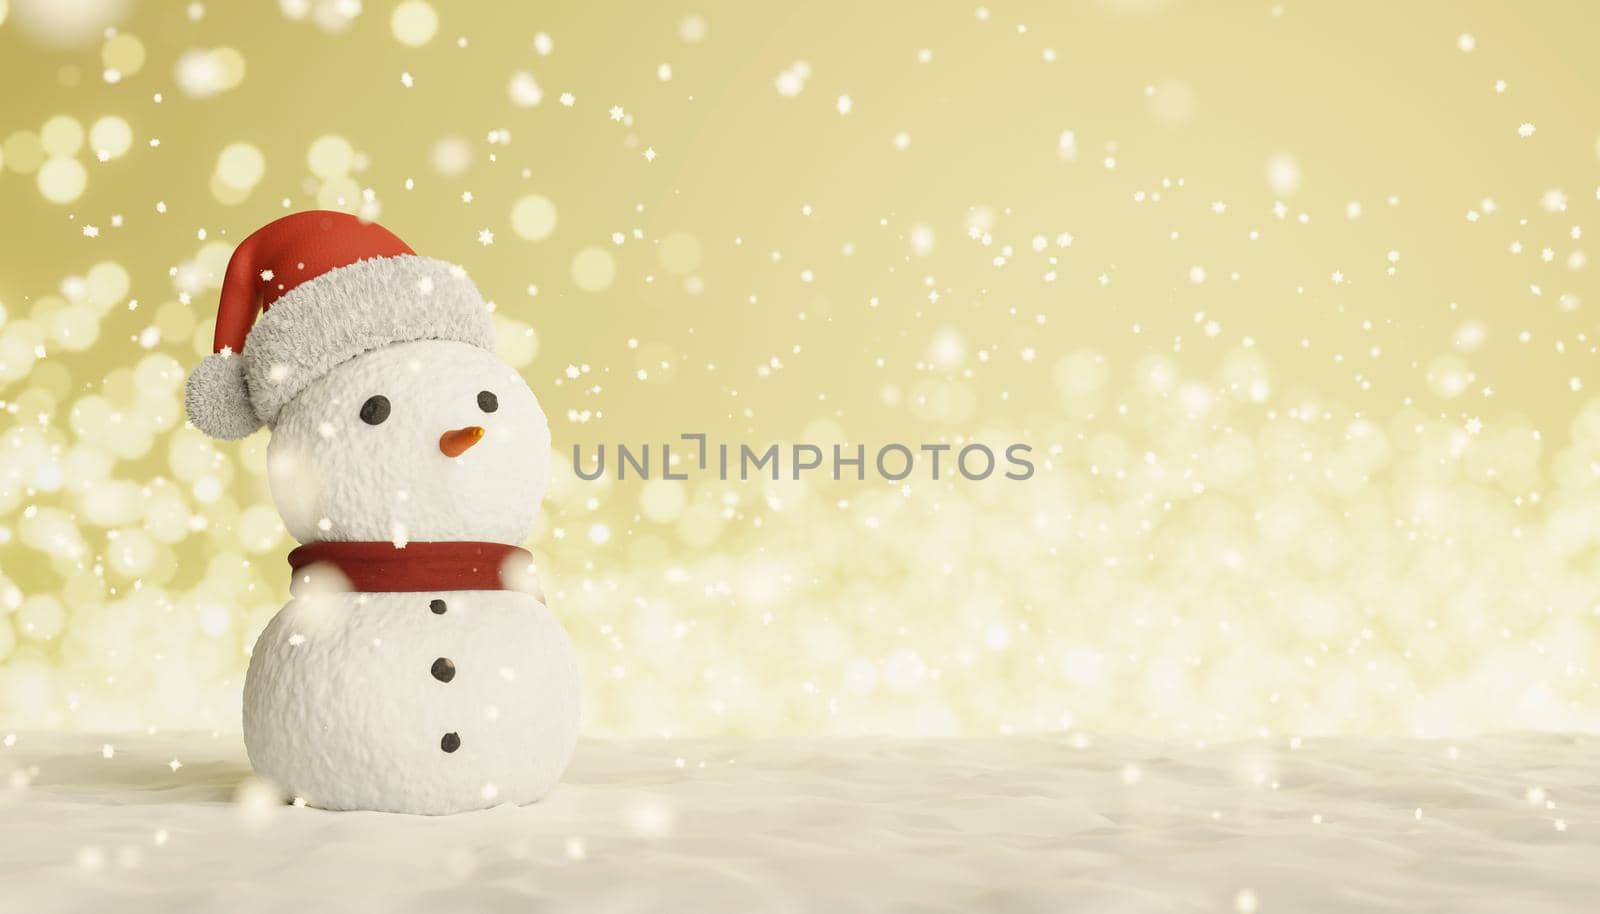 snowman with Santa Claus hat on snowy background with warm lights out of focus. copy space. 3d rendering